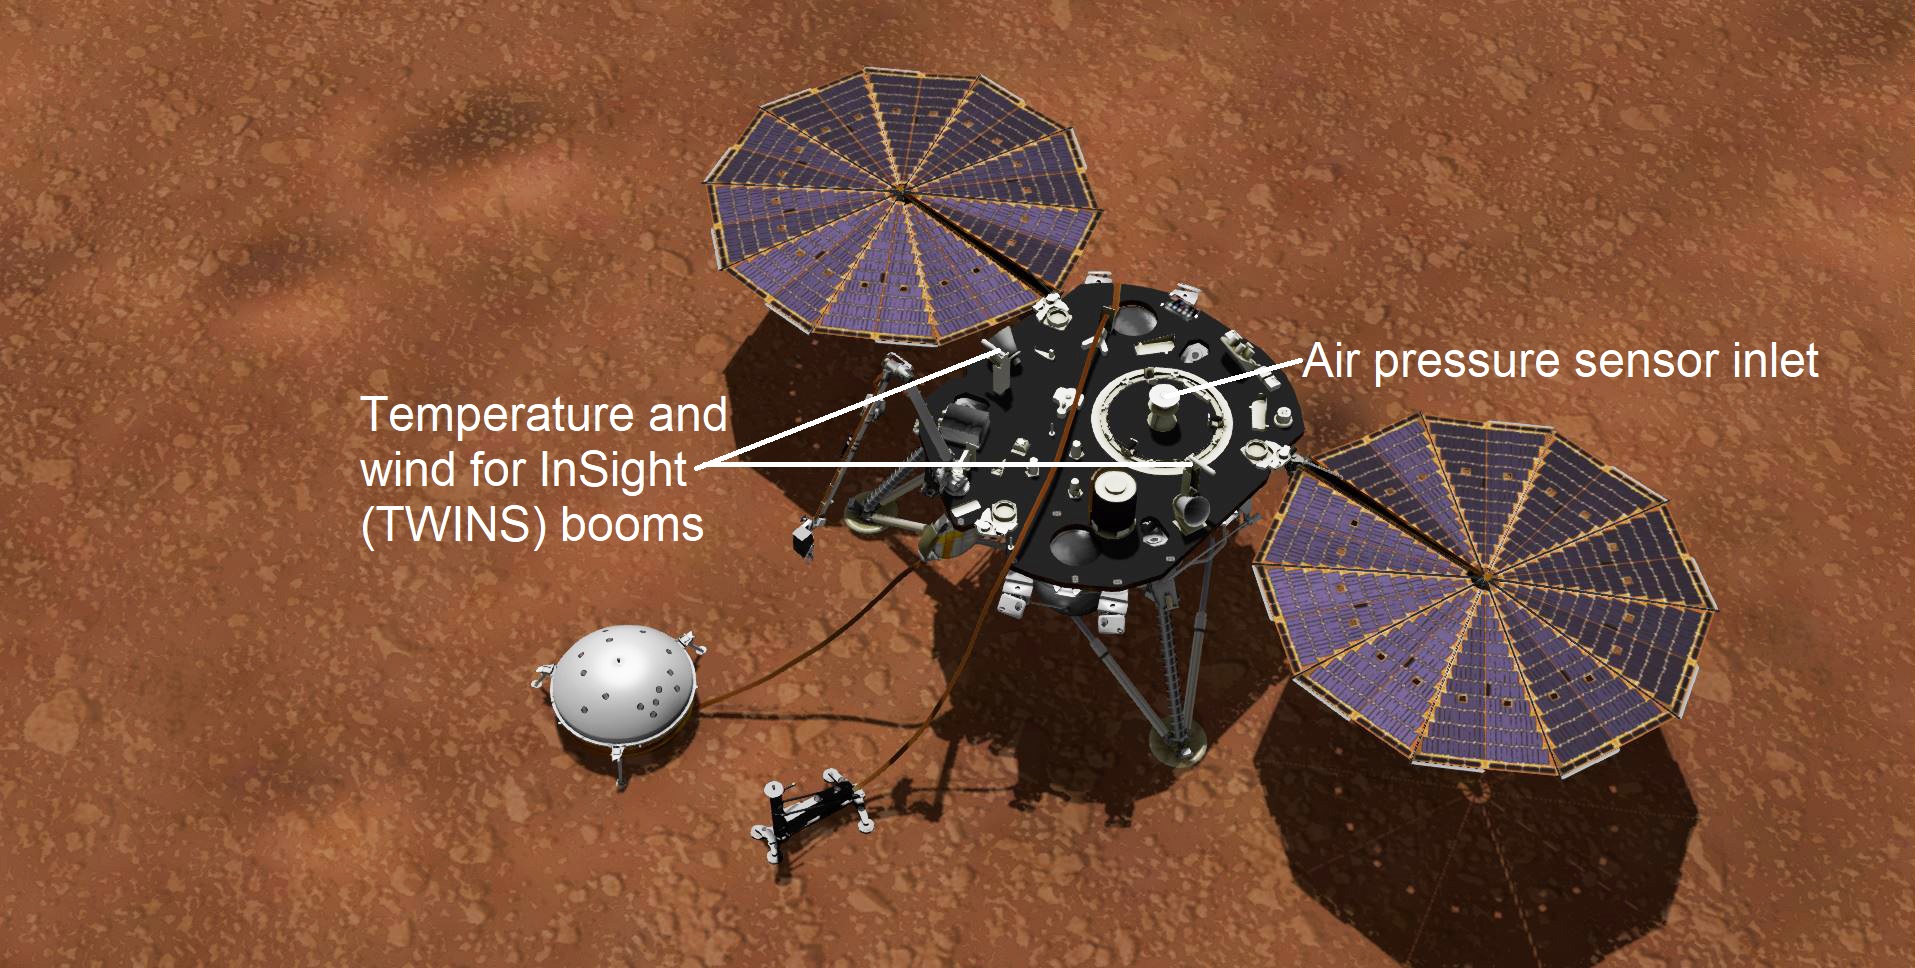 This artist's concept shows NASA's InSight lander with its instruments deployed on the Martian surface. Several of the sensors used for studying Martian weather are visible on its deck, including the inlet for an air pressure sensor and the east- and west-facing weather sensor booms.